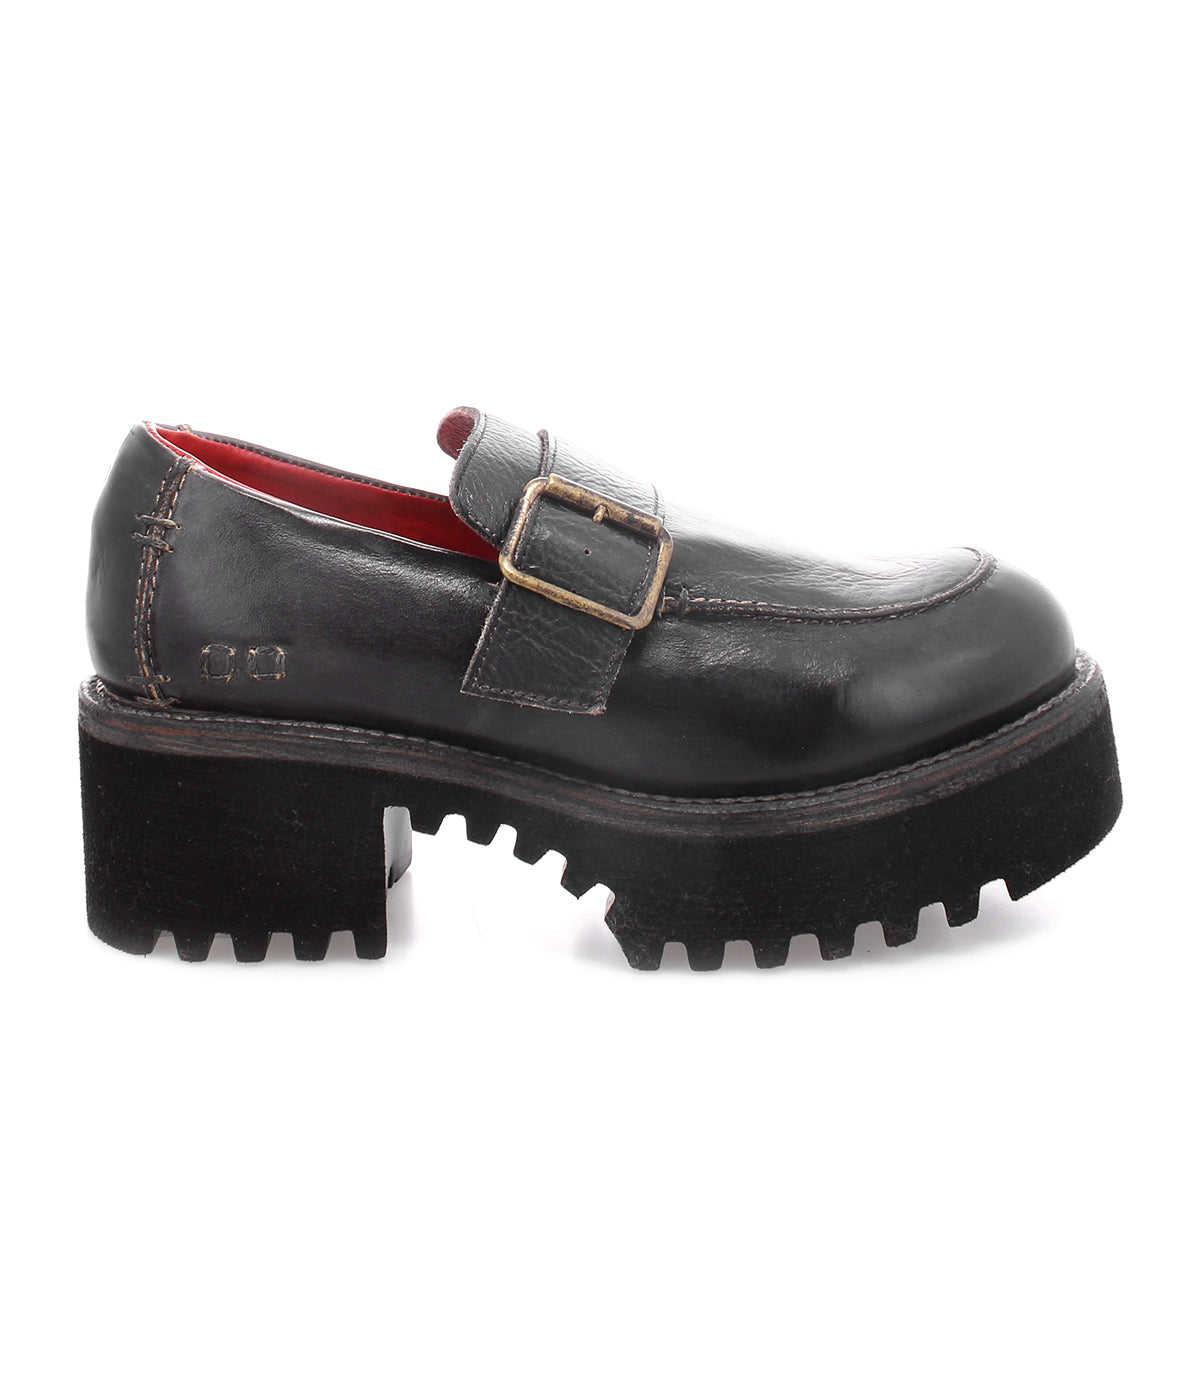 A comfortable black loafer with a buckle, perfect for fall fashion, called the Kavi by Bed Stu.